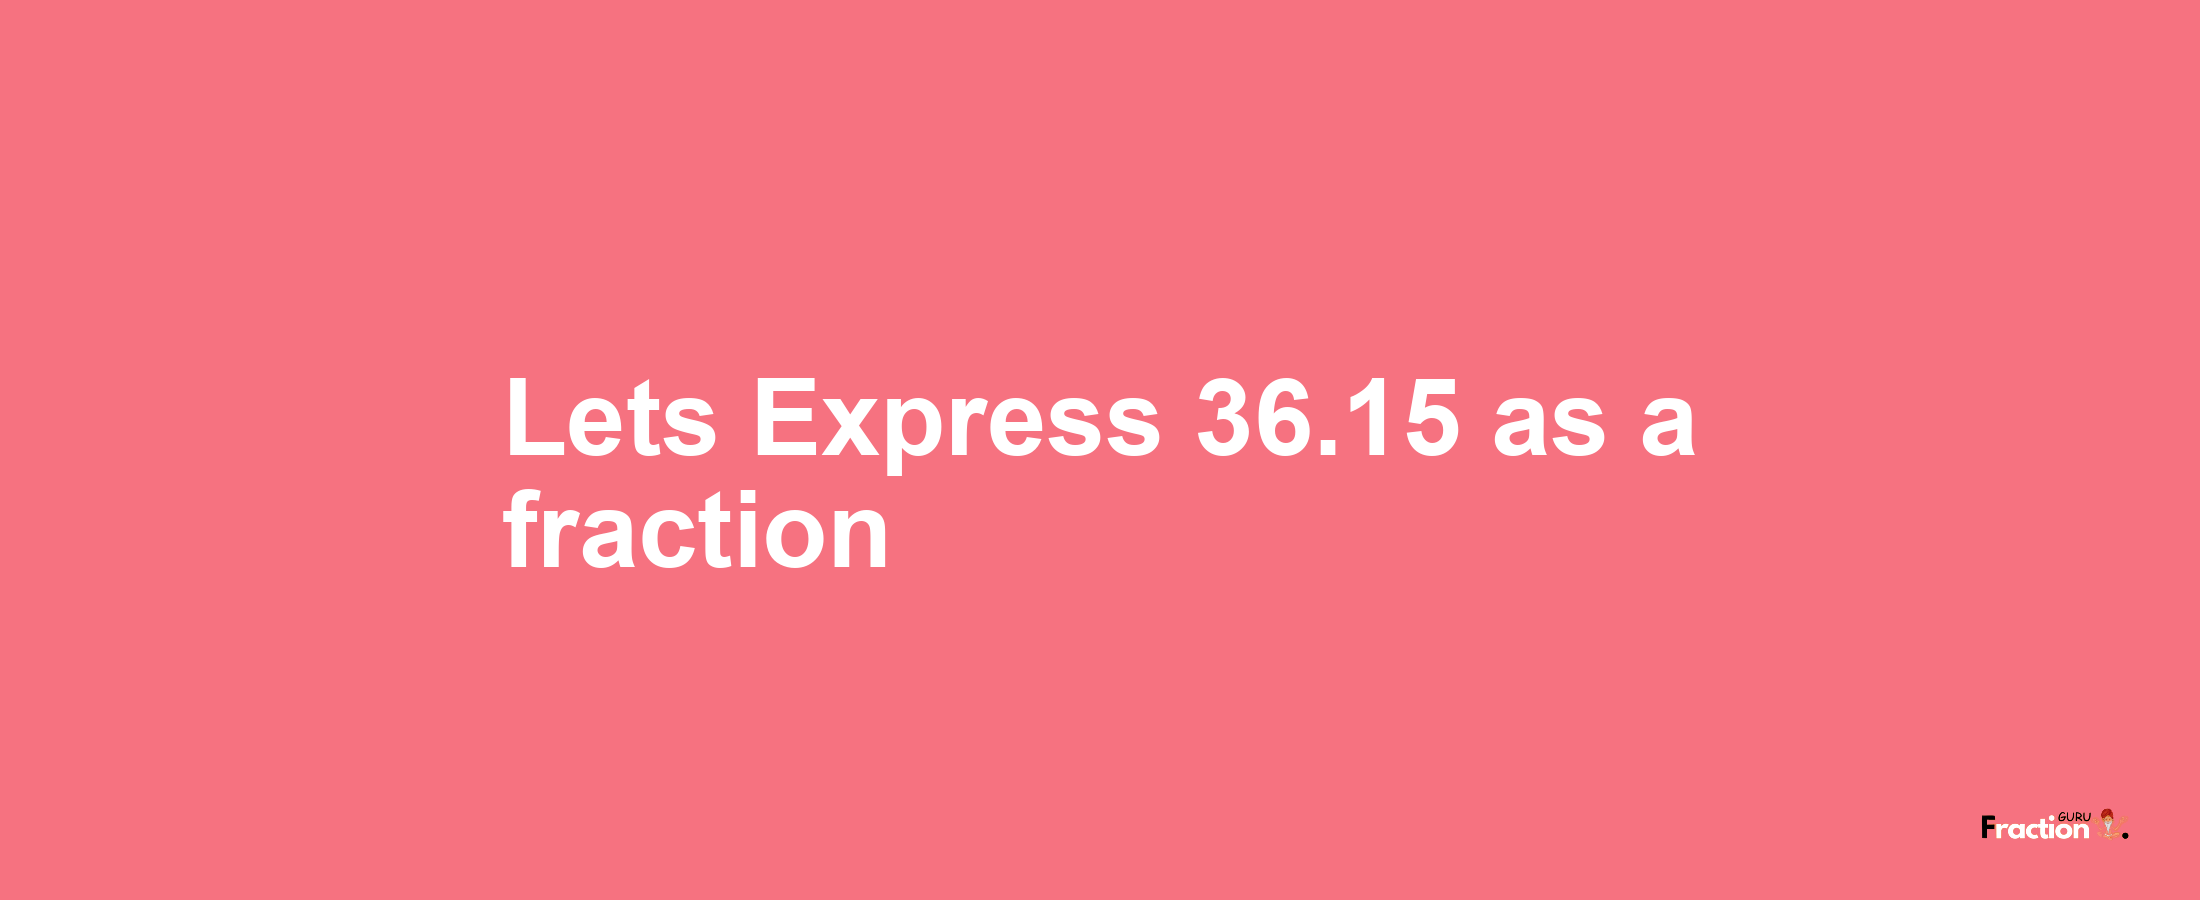 Lets Express 36.15 as afraction